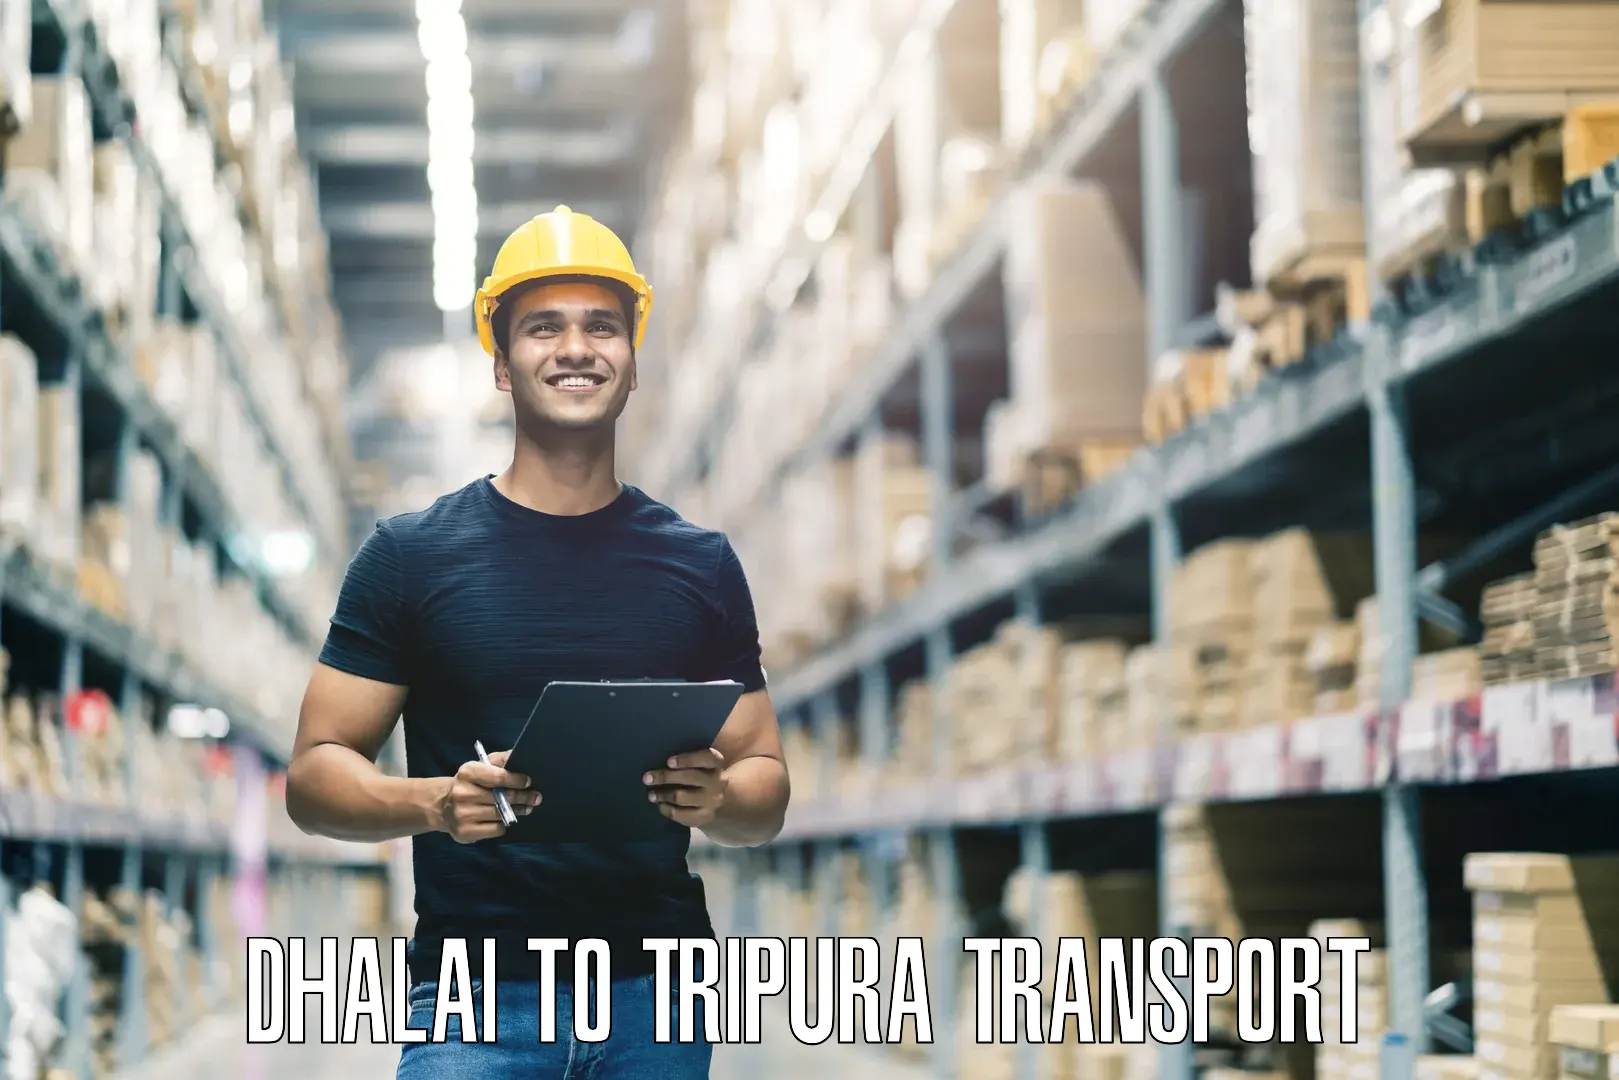 Container transport service Dhalai to Amarpur